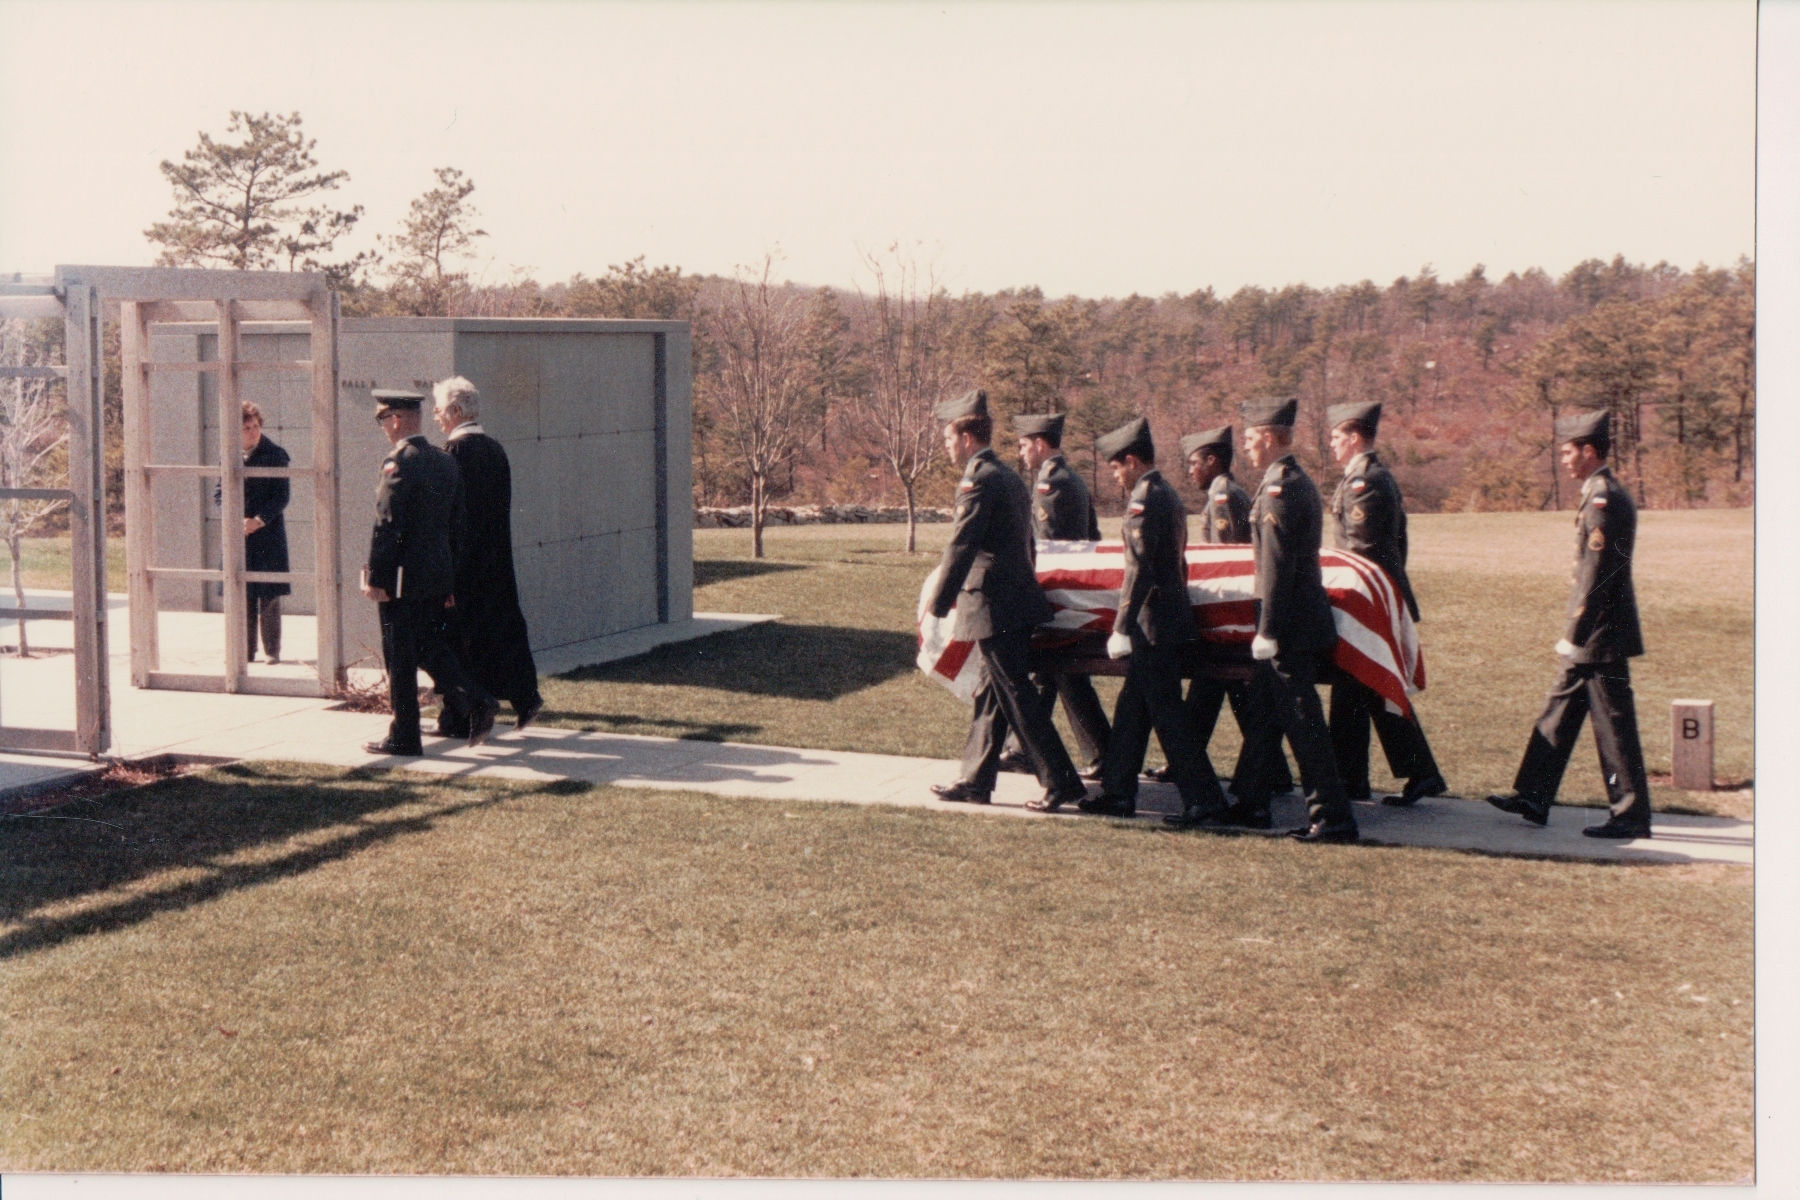 04.10.1985 Maybe #02  Les Sears' Funeral on Cape Cod